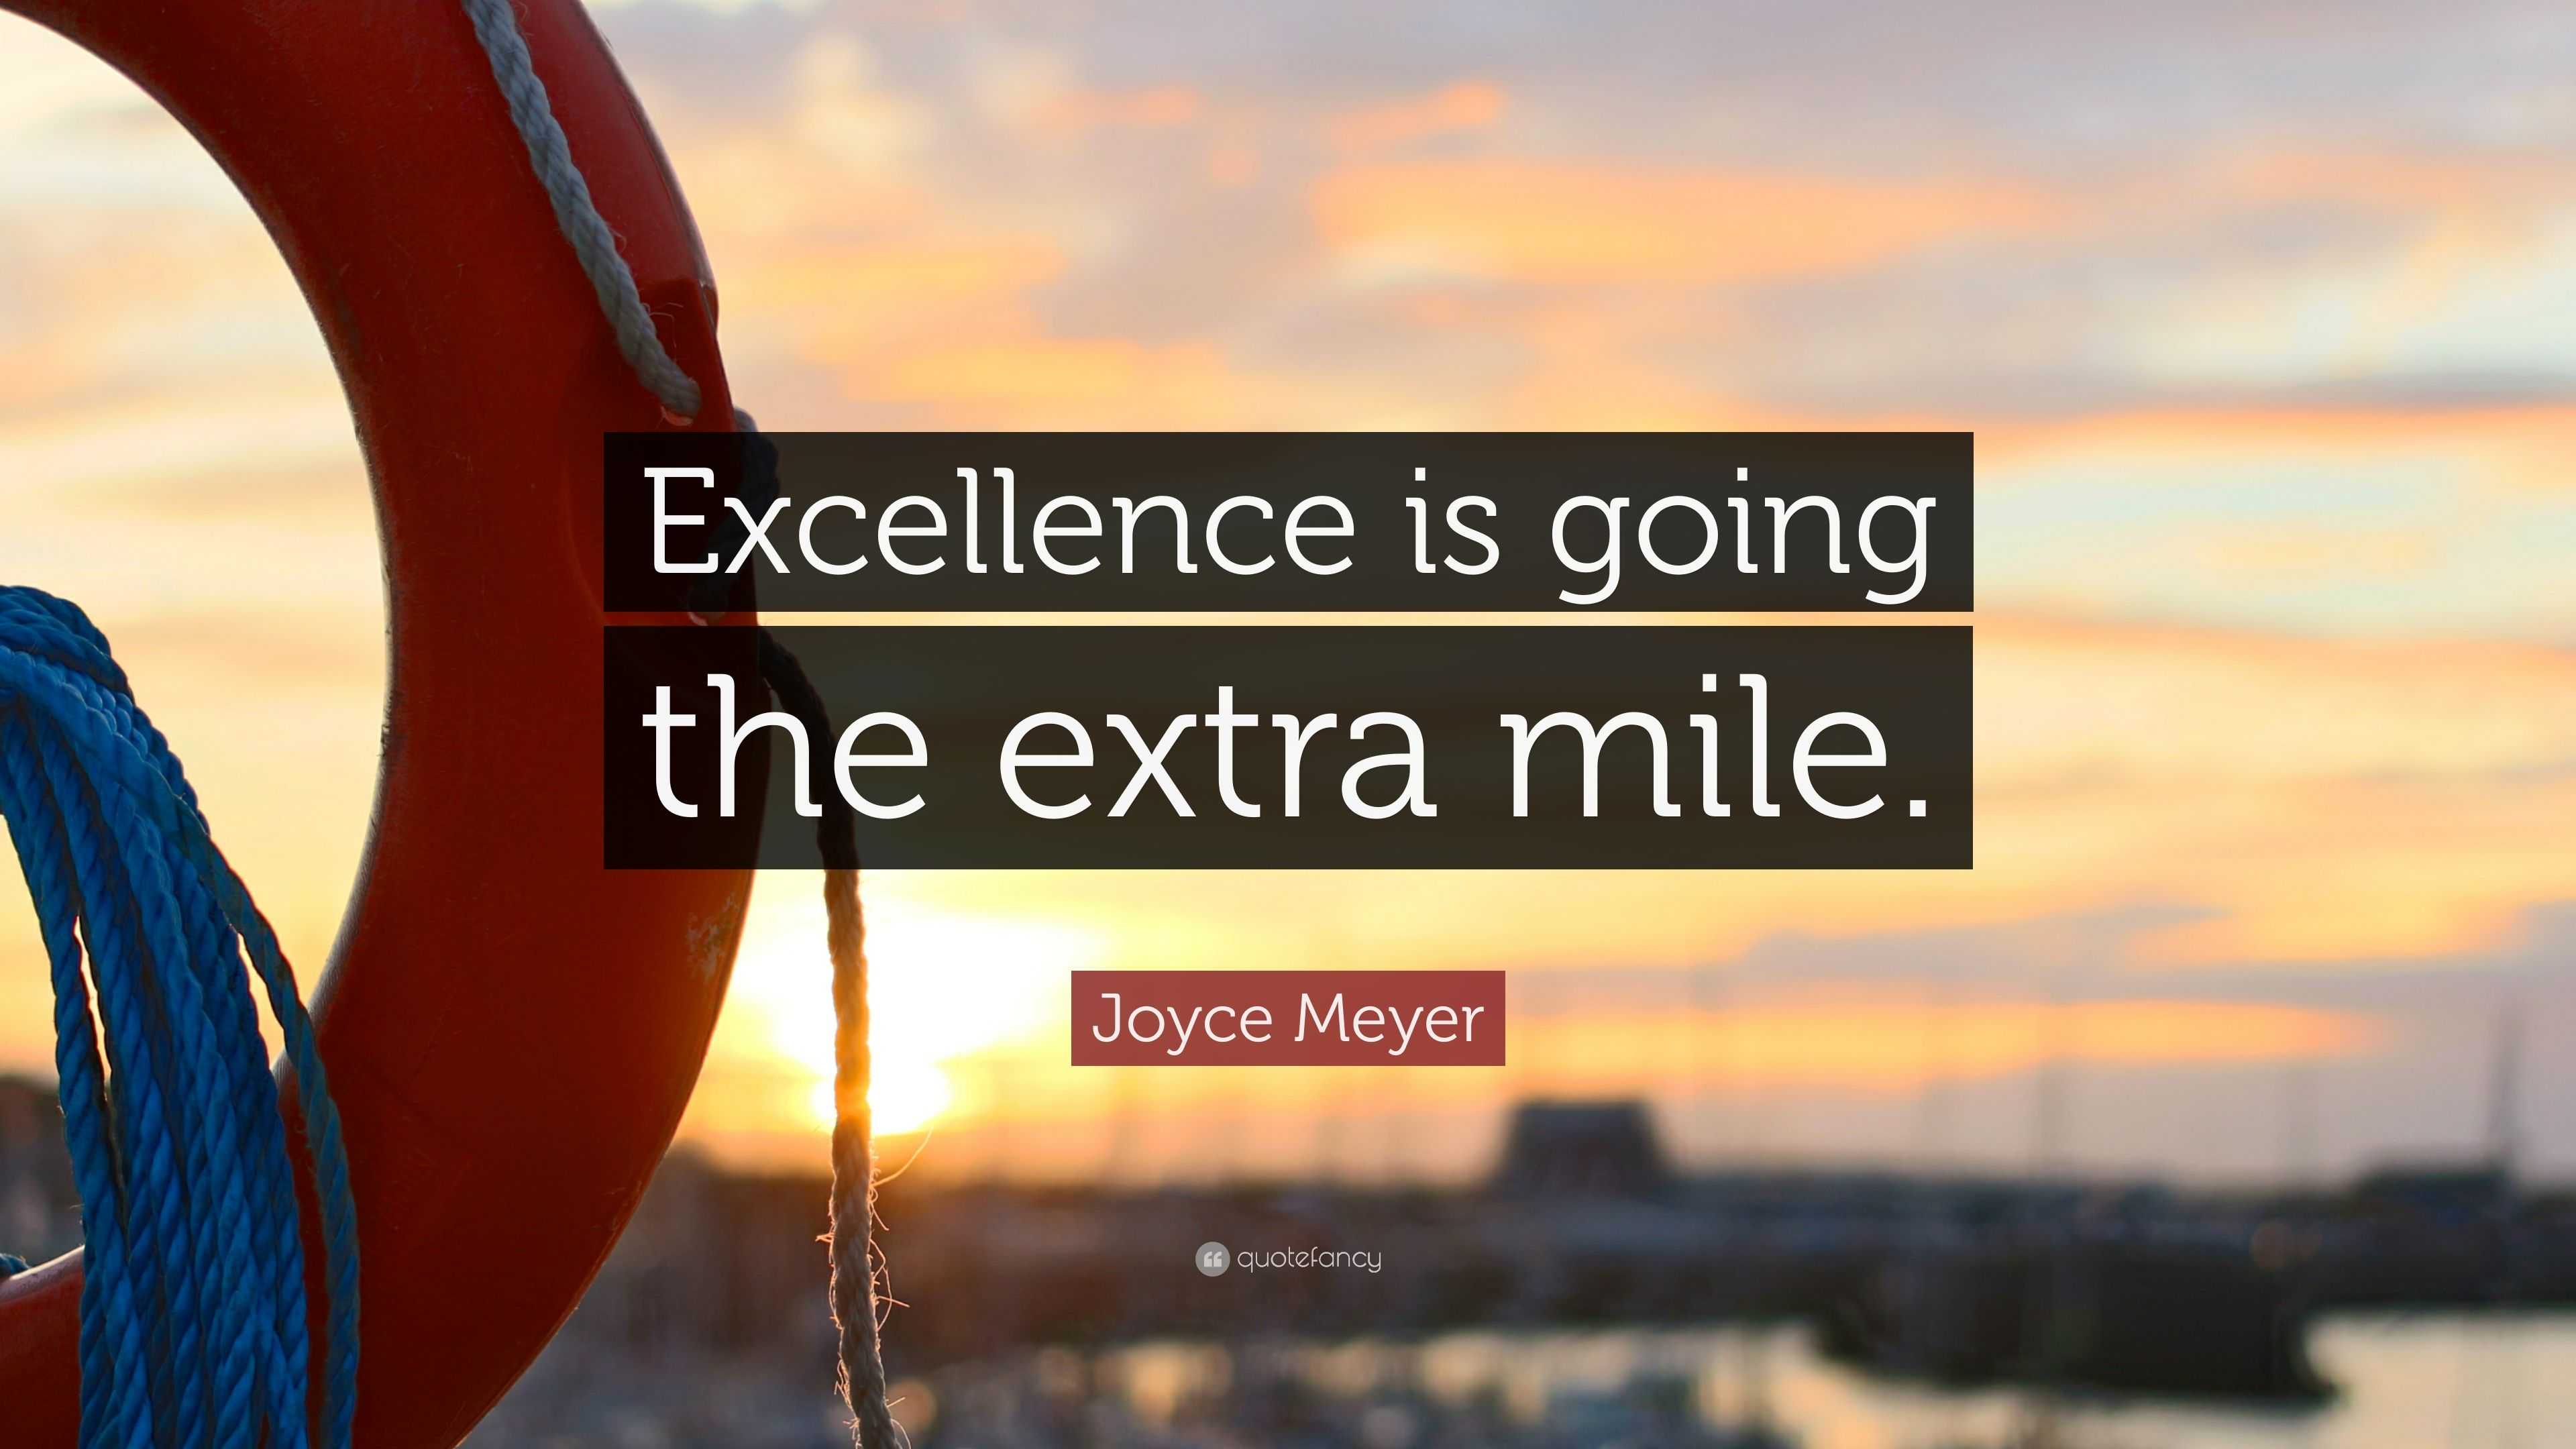 Joyce Meyer Quote: “Excellence is going the extra mile.” (12 wallpapers